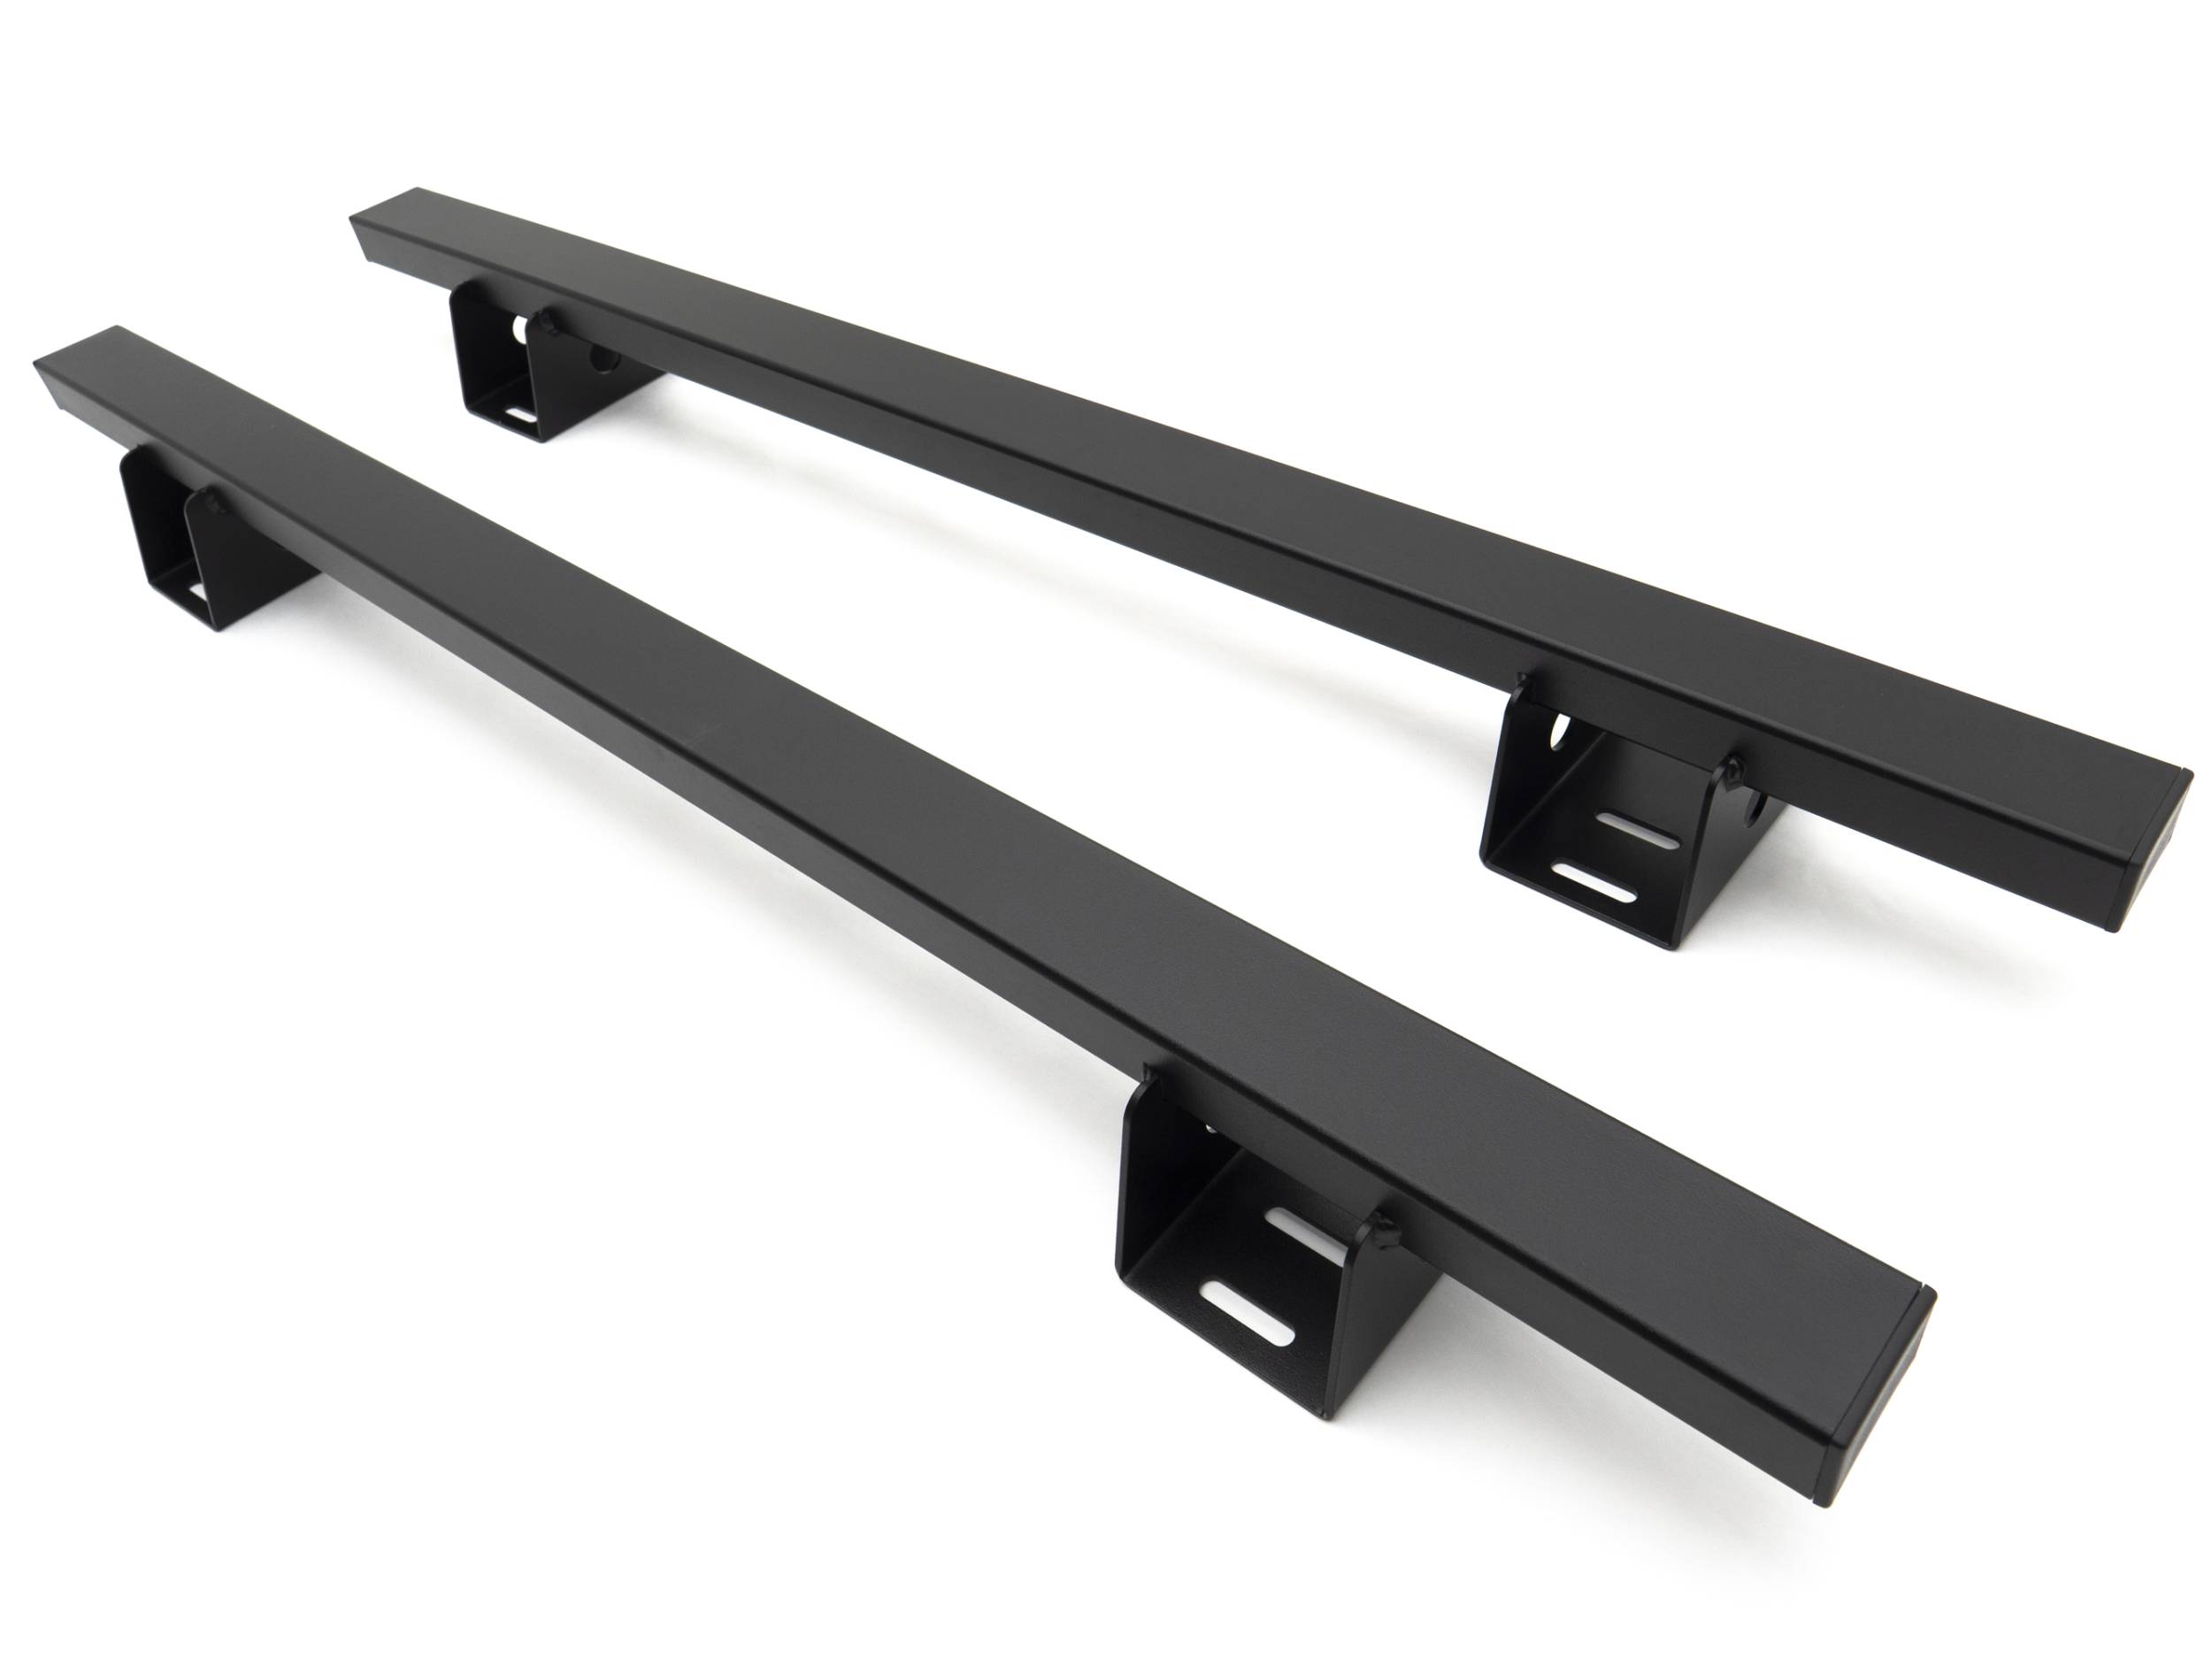 ZROADZ OFF ROAD PRODUCTS - 2019-2021 Ford Ranger Access Overland Rack Crossbars, Black, Mild Steel, Bolt-On, 2 Pc Set with Hardware - Part # Z835011